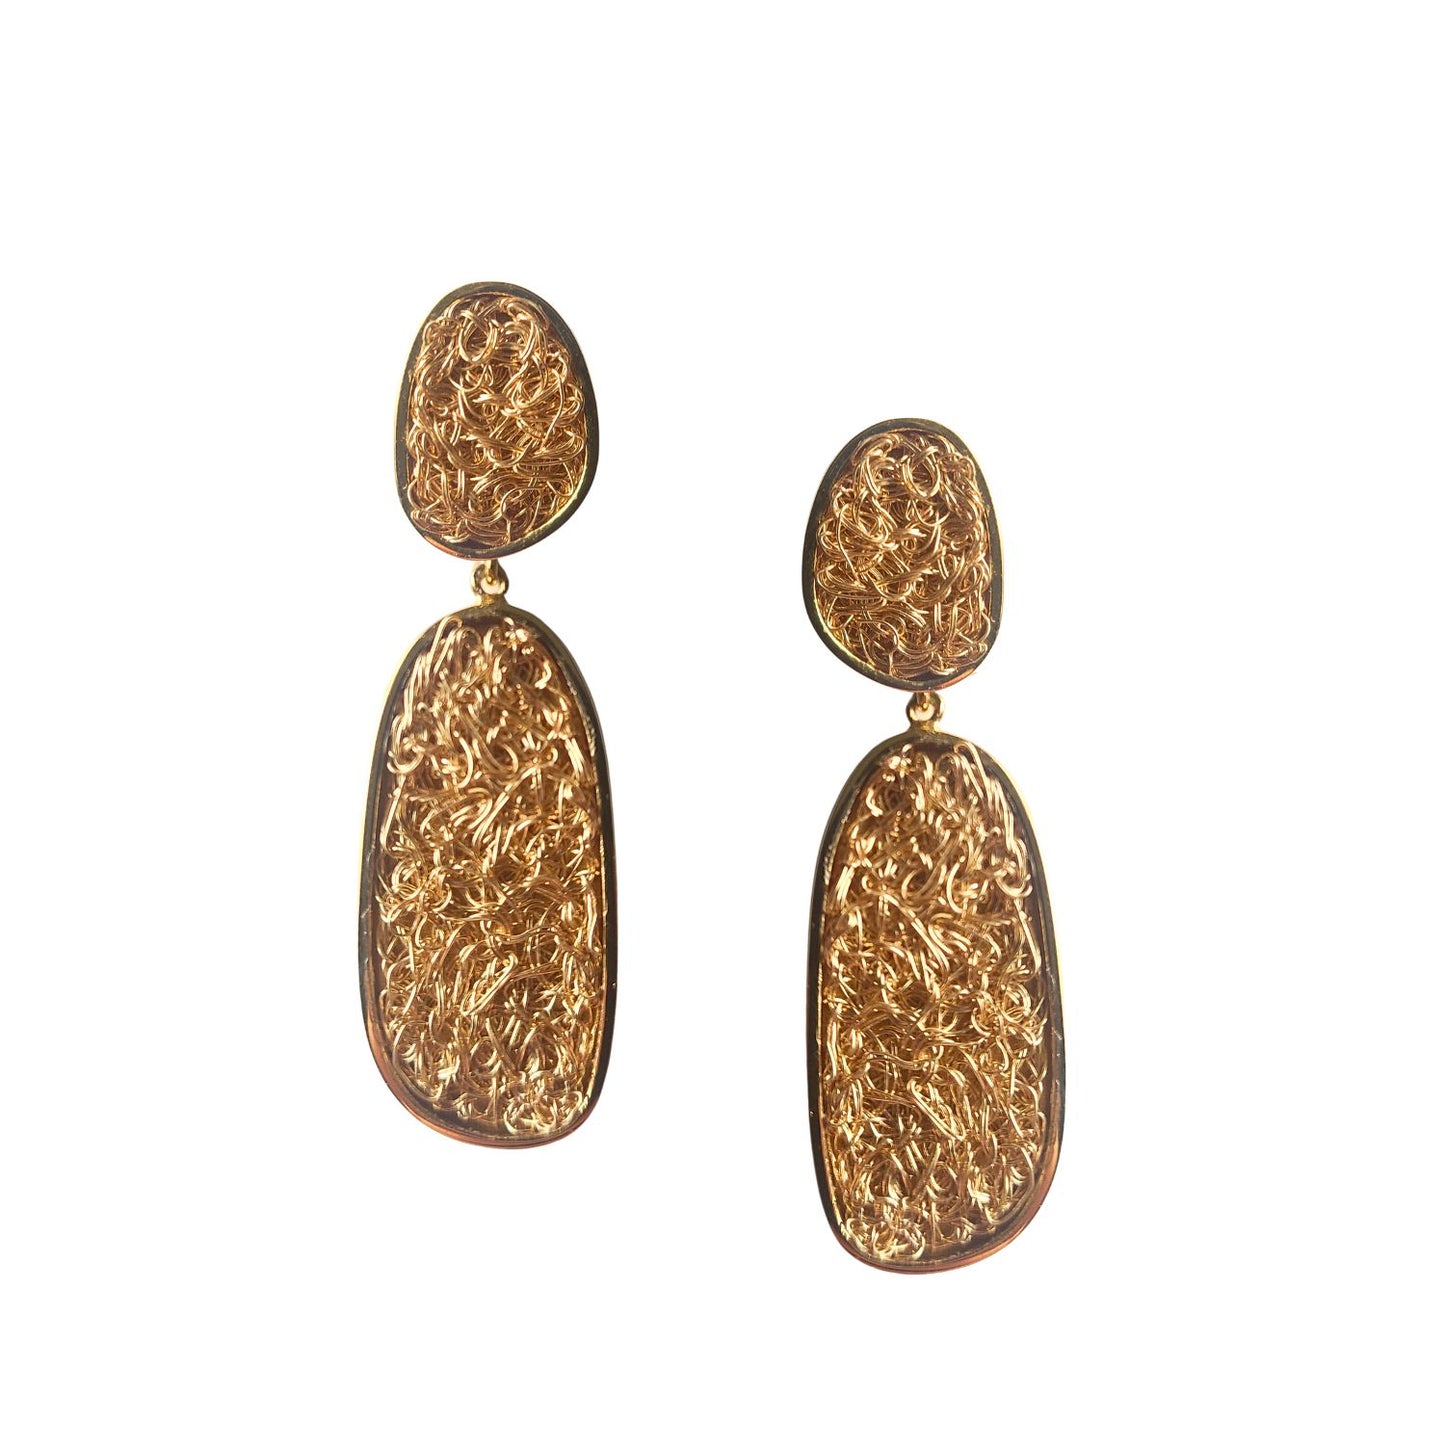 Artisan-crafted dangle earrings featuring delicate gold crochet work 